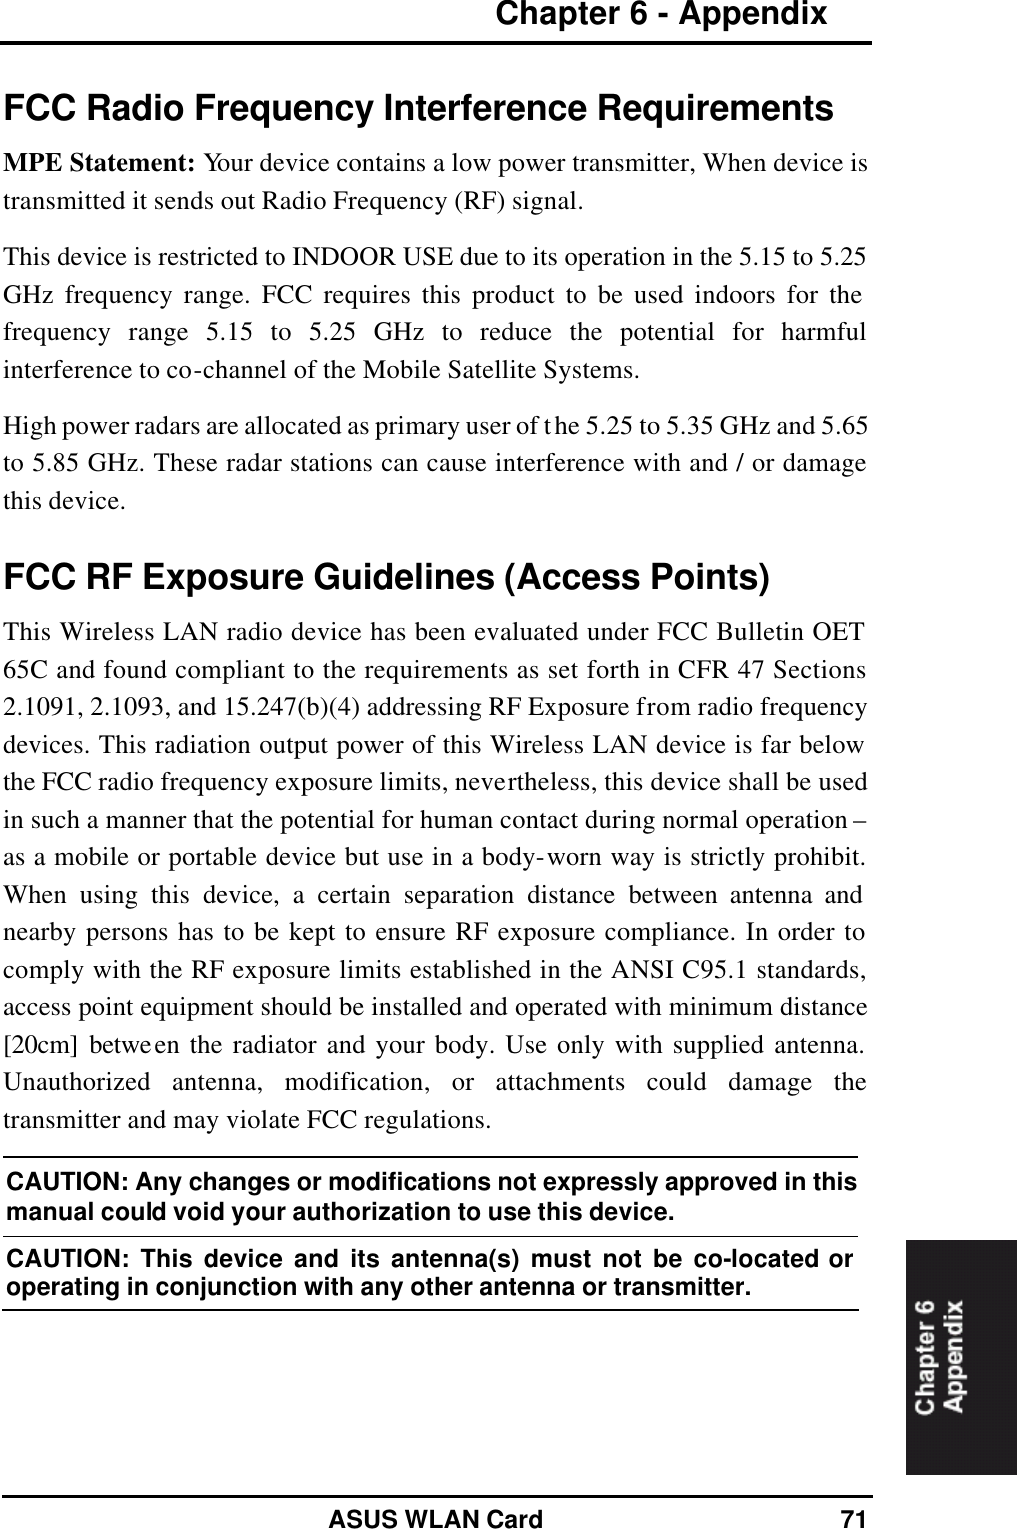 Chapter 6 - Appendix   ASUS WLAN Card 71 FCC Radio Frequency Interference Requirements MPE Statement: Your device contains a low power transmitter, When device is transmitted it sends out Radio Frequency (RF) signal. This device is restricted to INDOOR USE due to its operation in the 5.15 to 5.25 GHz frequency range. FCC requires this product to be used indoors for the frequency range 5.15 to 5.25 GHz to reduce the potential for harmful interference to co-channel of the Mobile Satellite Systems. High power radars are allocated as primary user of the 5.25 to 5.35 GHz and 5.65 to 5.85 GHz. These radar stations can cause interference with and / or damage this device. FCC RF Exposure Guidelines (Access Points) This Wireless LAN radio device has been evaluated under FCC Bulletin OET 65C and found compliant to the requirements as set forth in CFR 47 Sections 2.1091, 2.1093, and 15.247(b)(4) addressing RF Exposure from radio frequency devices. This radiation output power of this Wireless LAN device is far below the FCC radio frequency exposure limits, nevertheless, this device shall be used in such a manner that the potential for human contact during normal operation – as a mobile or portable device but use in a body-worn way is strictly prohibit. When using this device, a certain separation distance between antenna and nearby persons has to be kept to ensure RF exposure compliance. In order to comply with the RF exposure limits established in the ANSI C95.1 standards, access point equipment should be installed and operated with minimum distance [20cm] between the radiator and your body. Use only with supplied antenna. Unauthorized antenna, modification, or attachments could damage the transmitter and may violate FCC regulations. CAUTION: Any changes or modifications not expressly approved in this manual could void your authorization to use this device. CAUTION: This device and its antenna(s) must not be co-located or operating in conjunction with any other antenna or transmitter.  